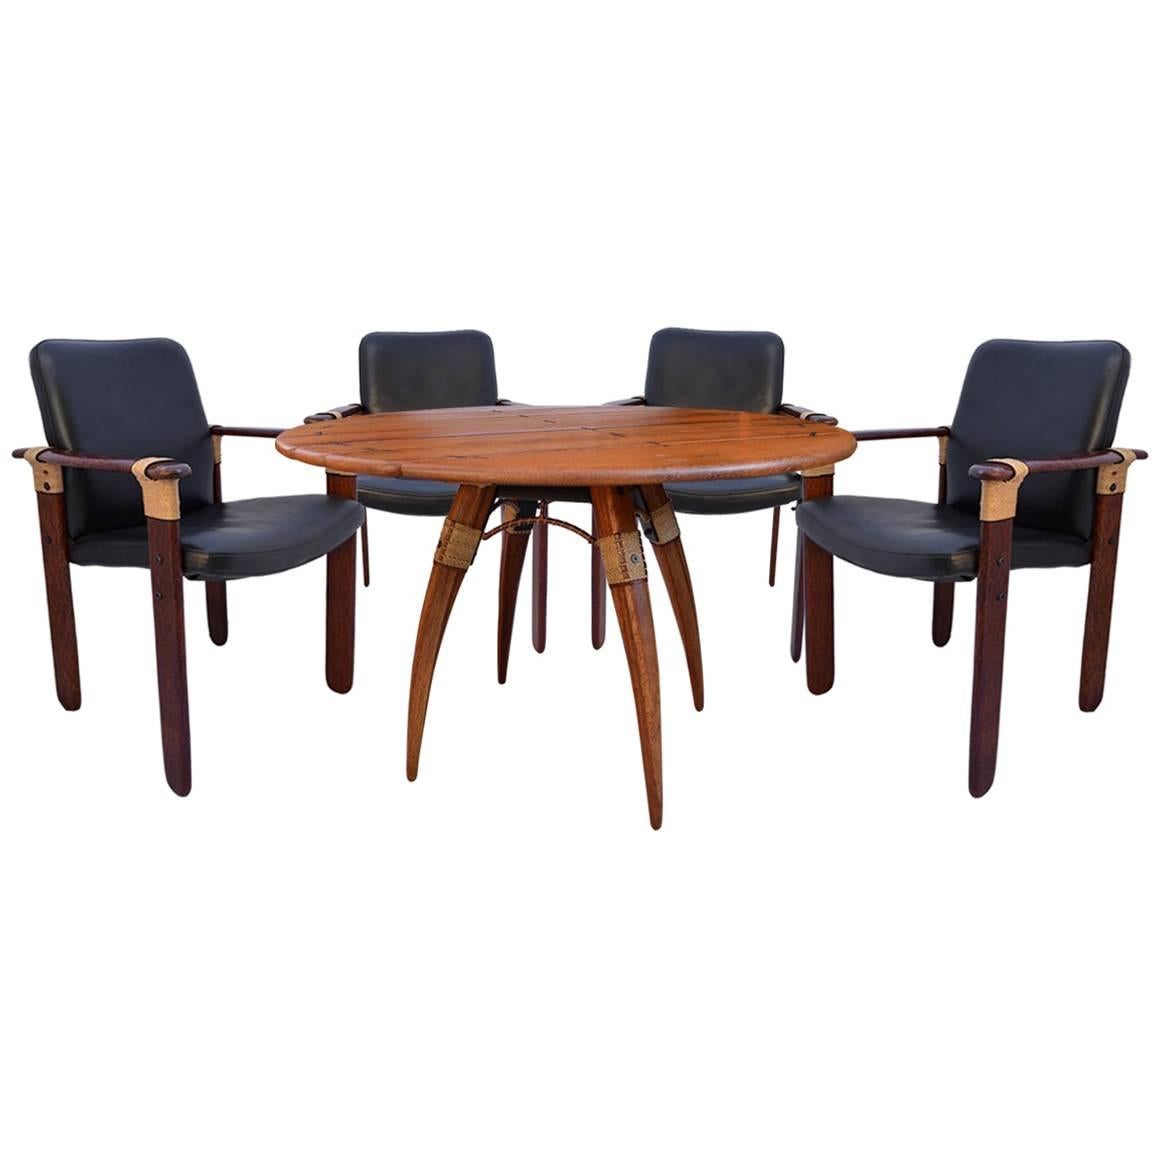 Pacific Green Round Dining Table with Five Matching Chairs